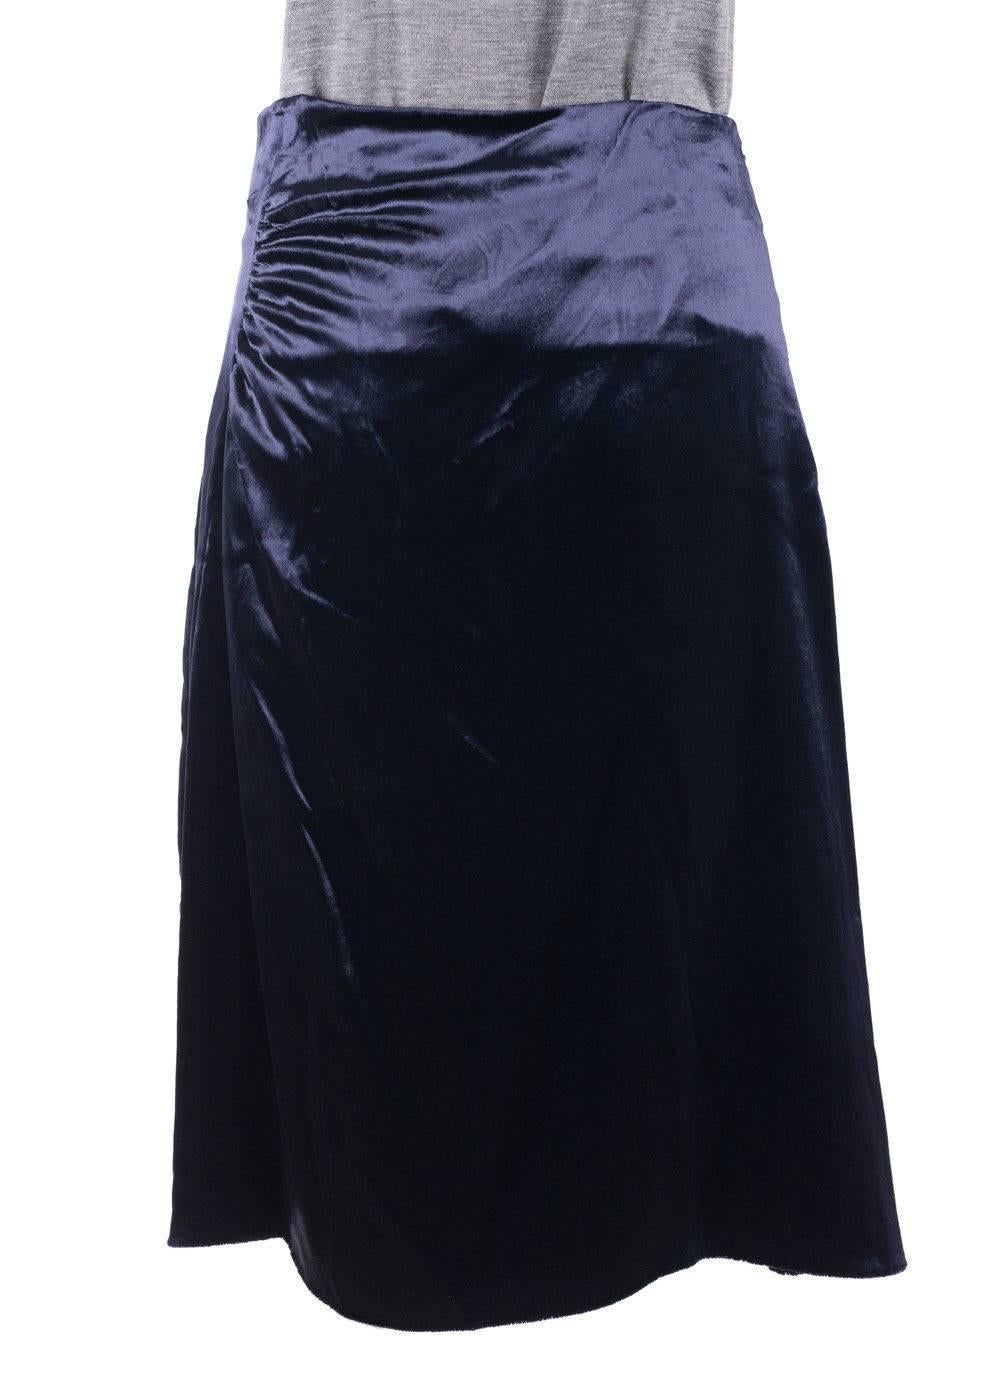 Brand New Prada Womens Velvet Skirt
Original Tag
Retails in Stores & Online for $1125
Women's Size EUR 40/ US 2 Fits True to Size

With a fluid silk blouse you can wear this Prada velvet skirt excellently. This skirt was designed in Italy using silk